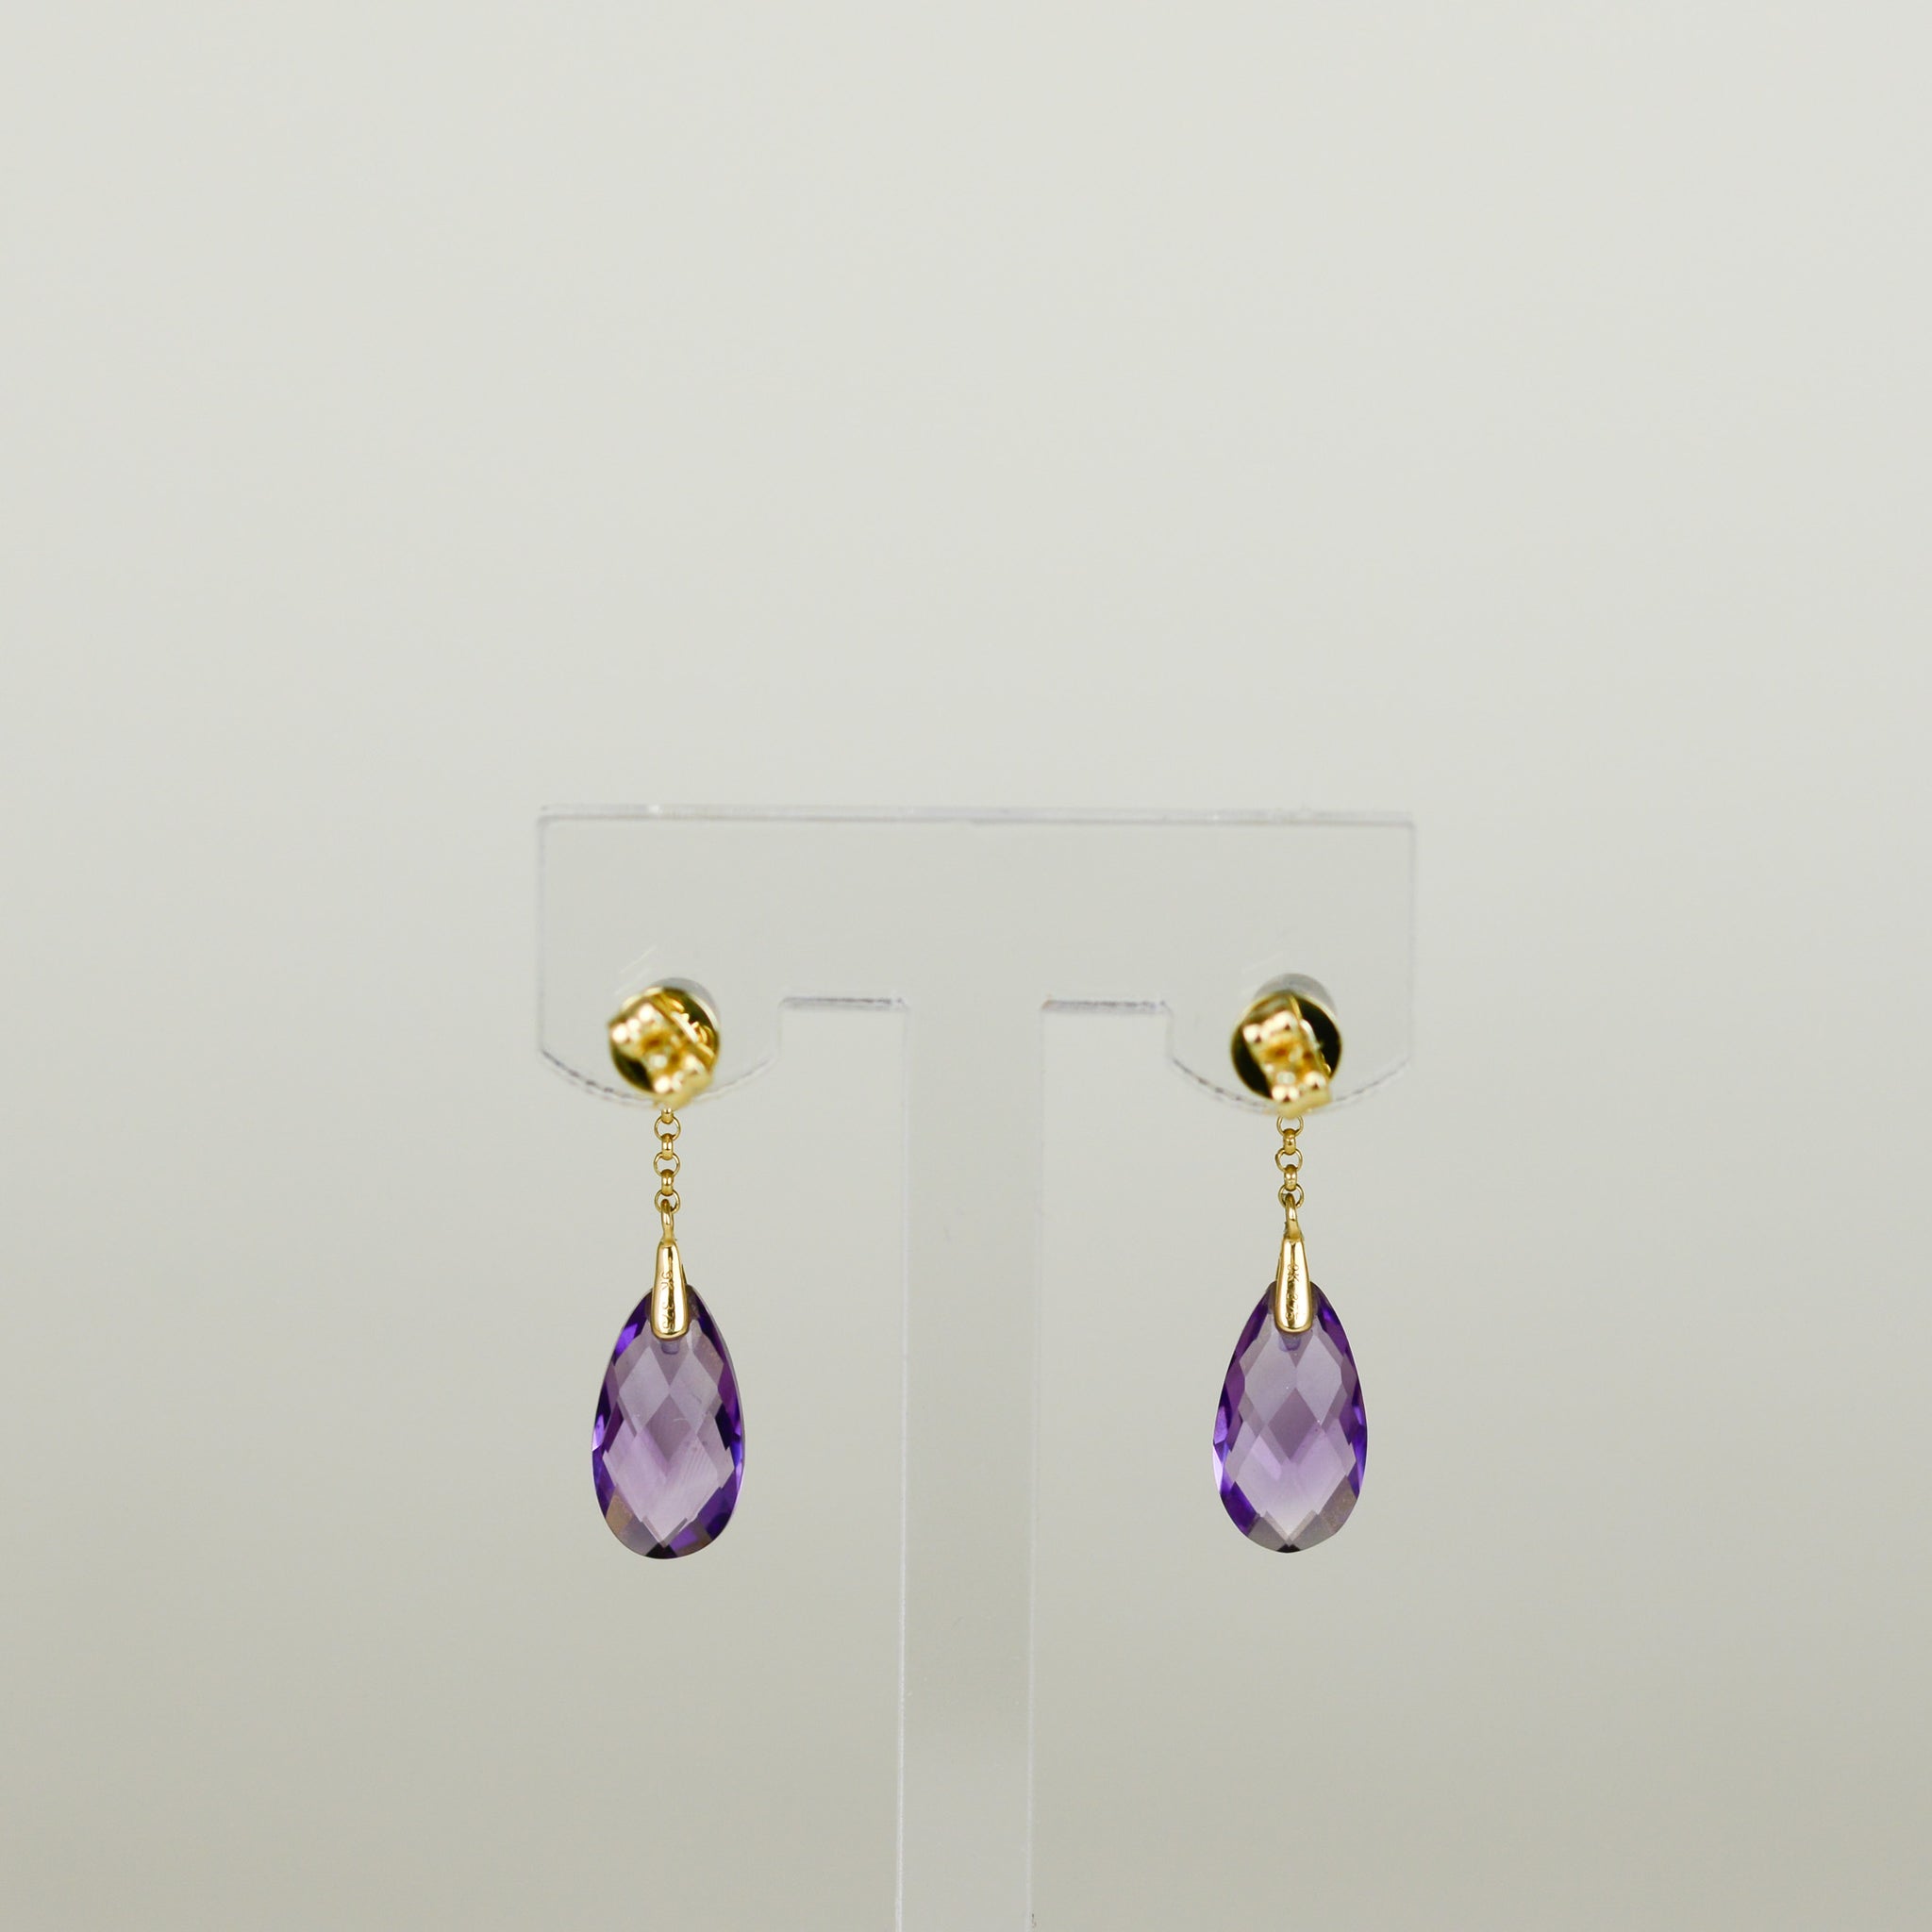 9ct Yellow Gold 3.22ct Oval Briolette Amethyst and Pearl Drop Earrings